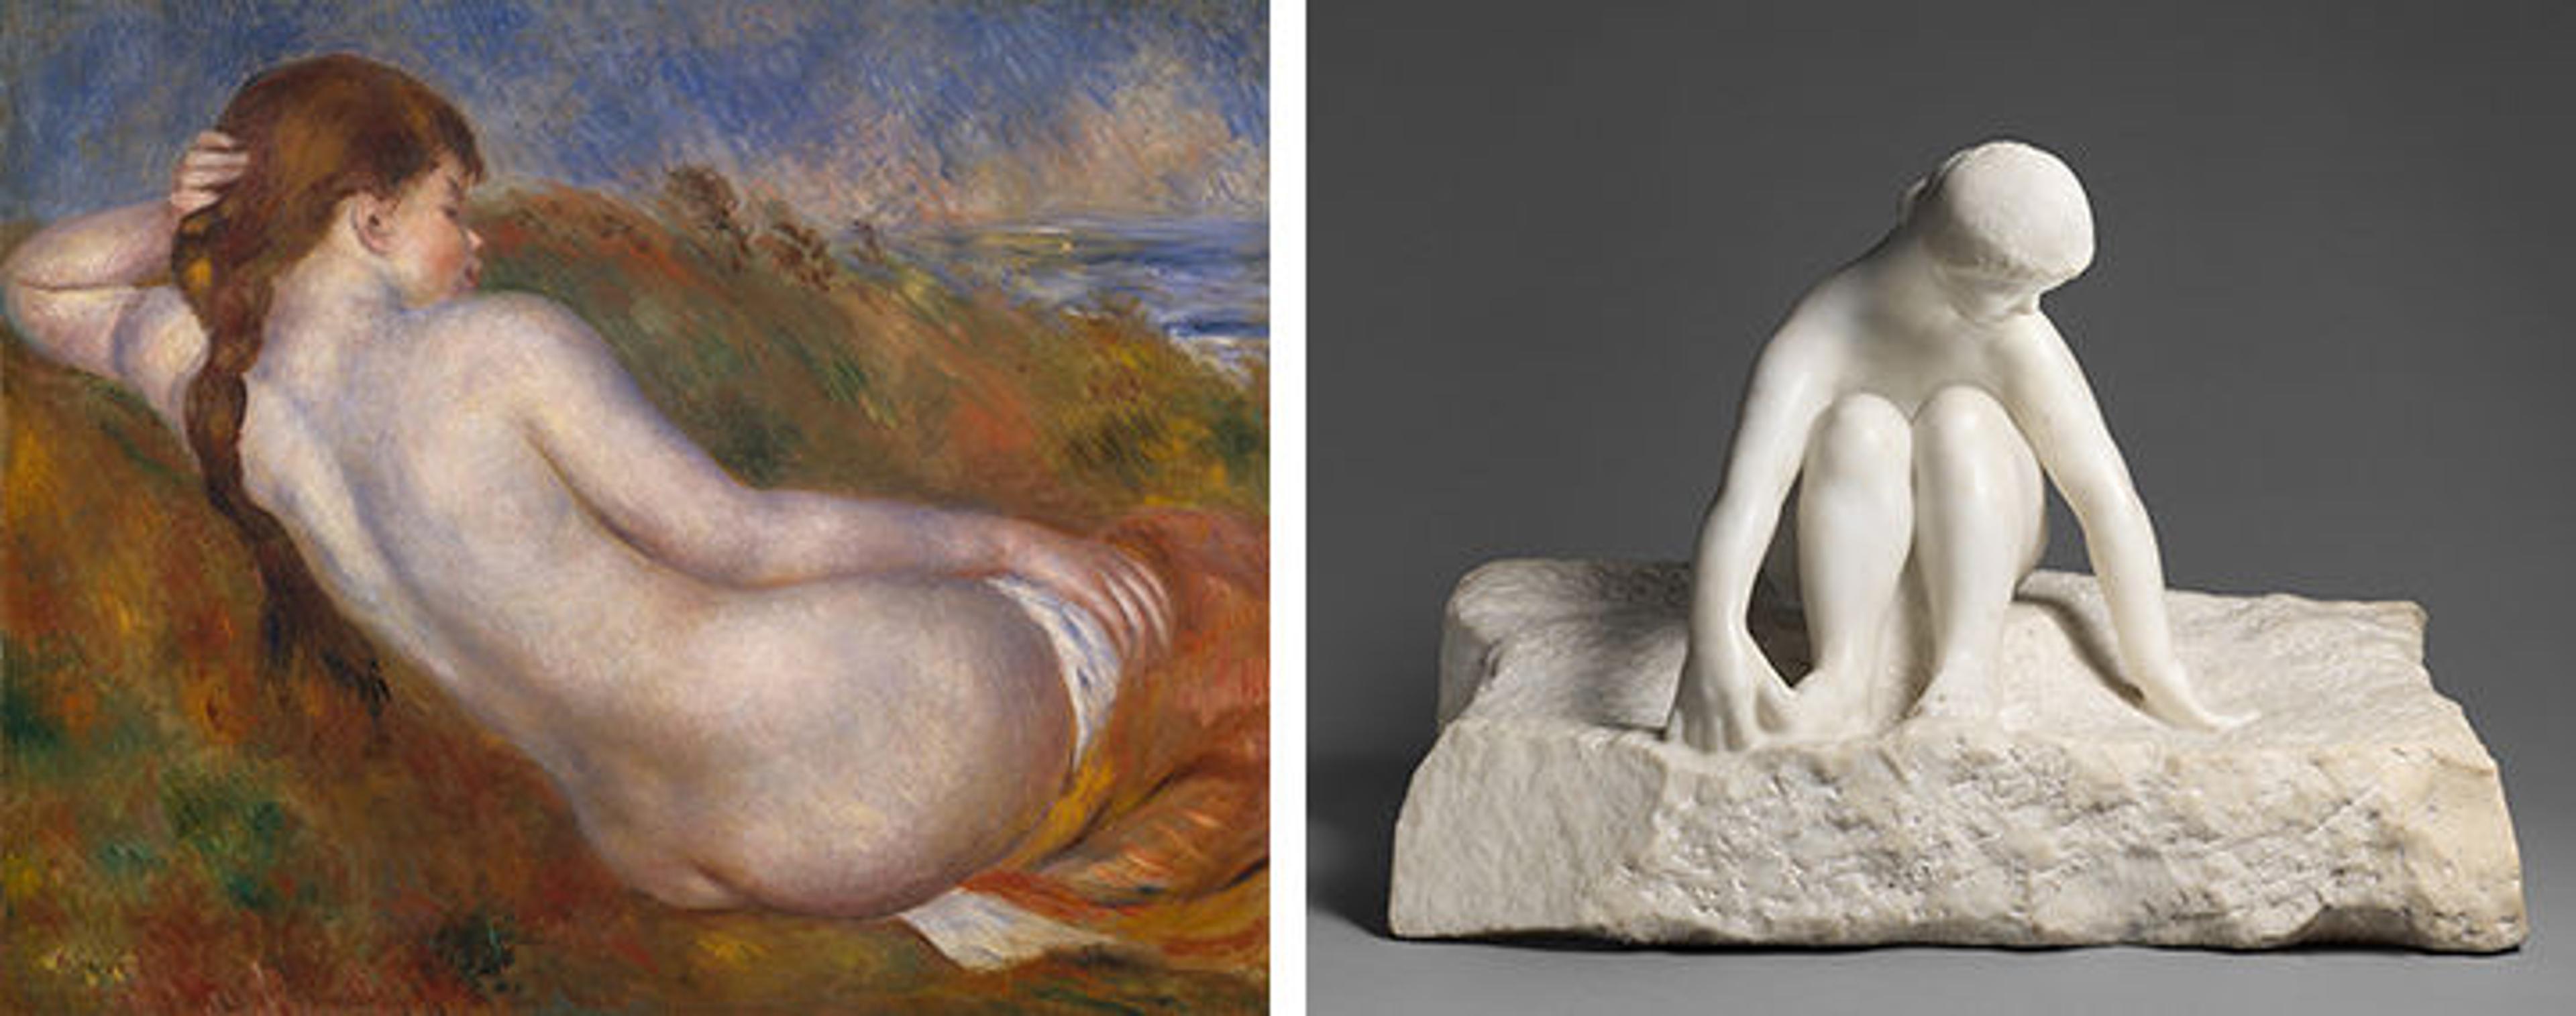 Renoir and a sculpture by Auguste Rodin